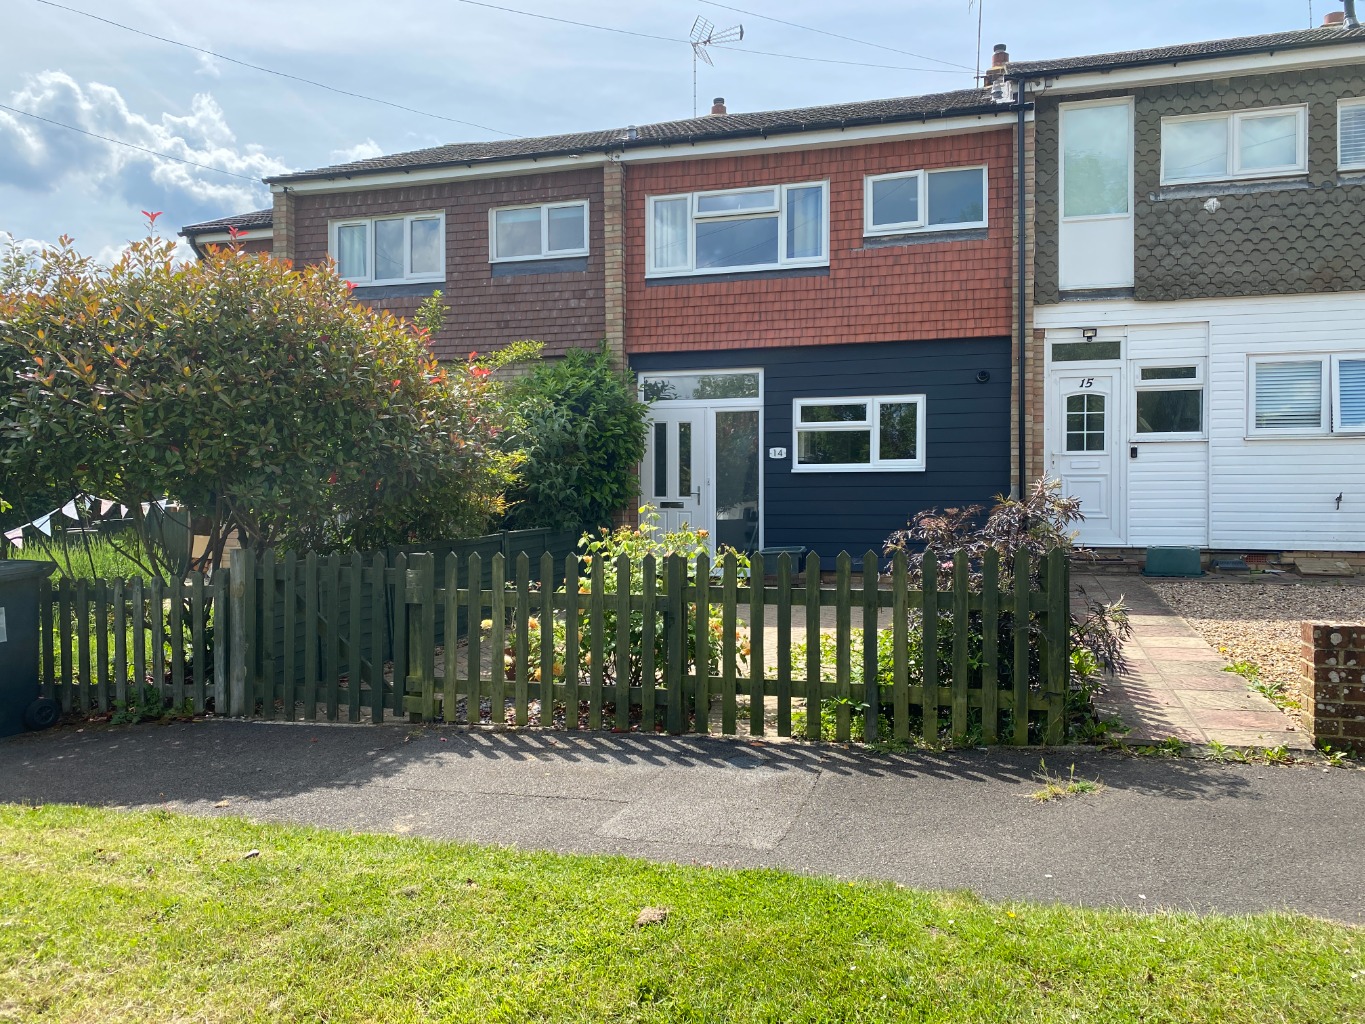 Within walking distance of the centre of town this three bedroom, terraced house is set in a very popular location.  There are many benefits to this property non more in my opinion than the double width garage which lends itself to a great variety of uses.